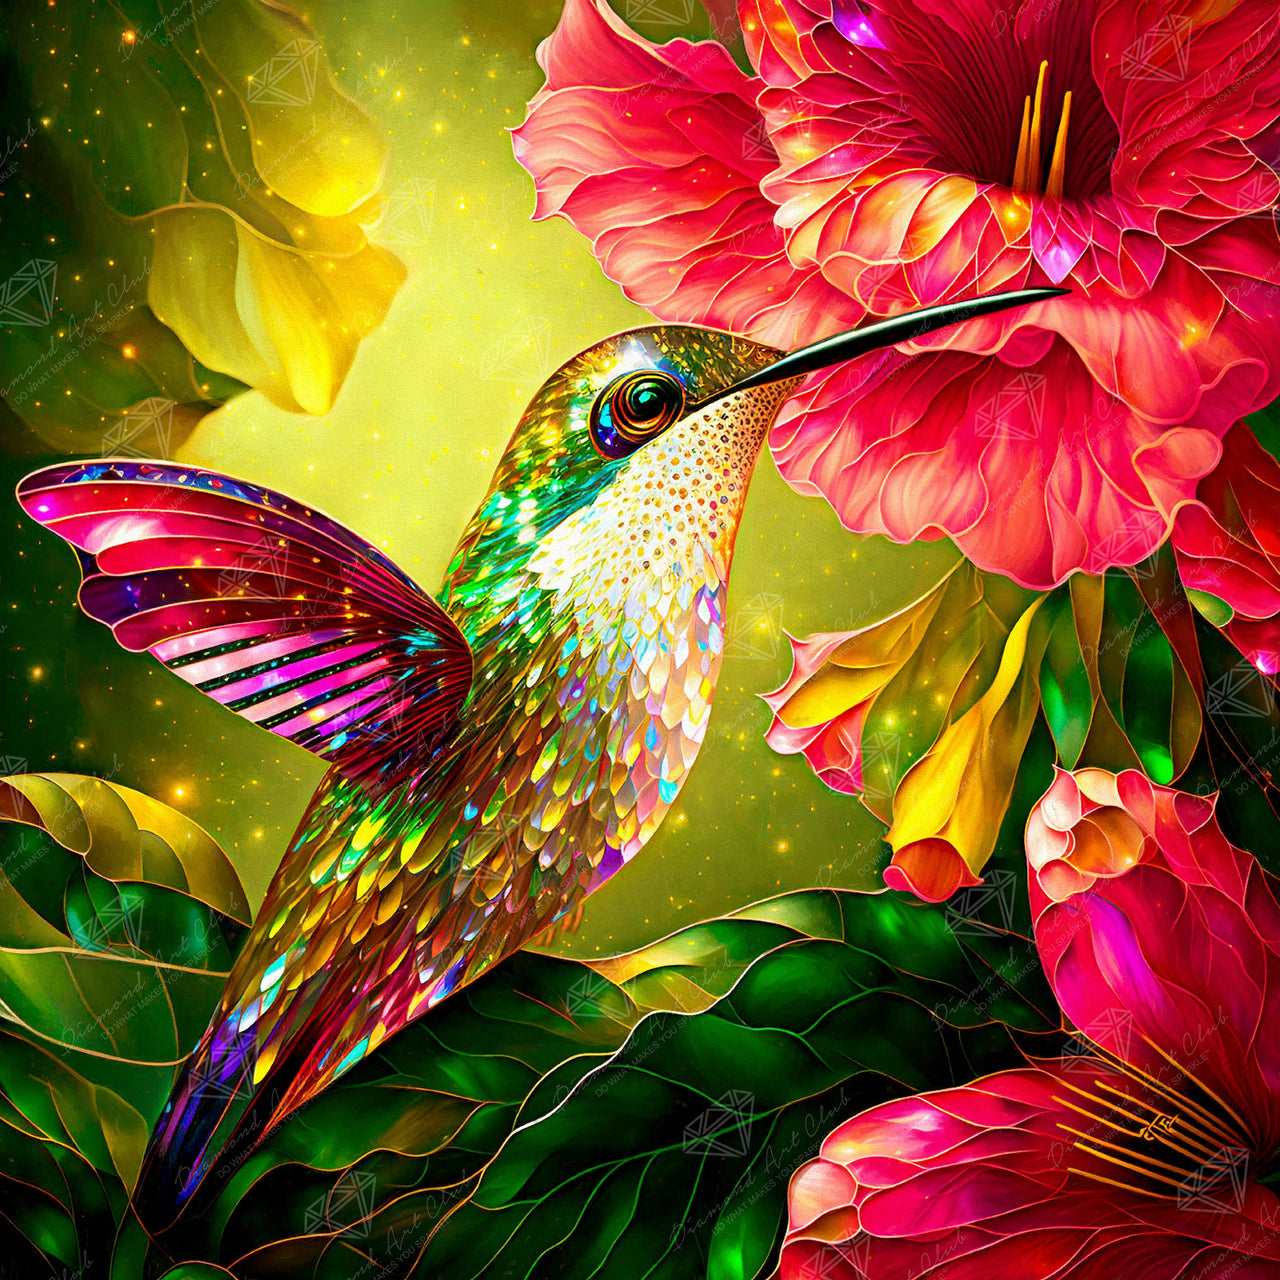 Diamond Painting Stained Glass Hummingbird & Hibiscus 25.6" x 25.6" (65cm x 65cm) / Square with 60 Colors including 4 ABs and 1 Fairy Dust Diamonds / 68,121